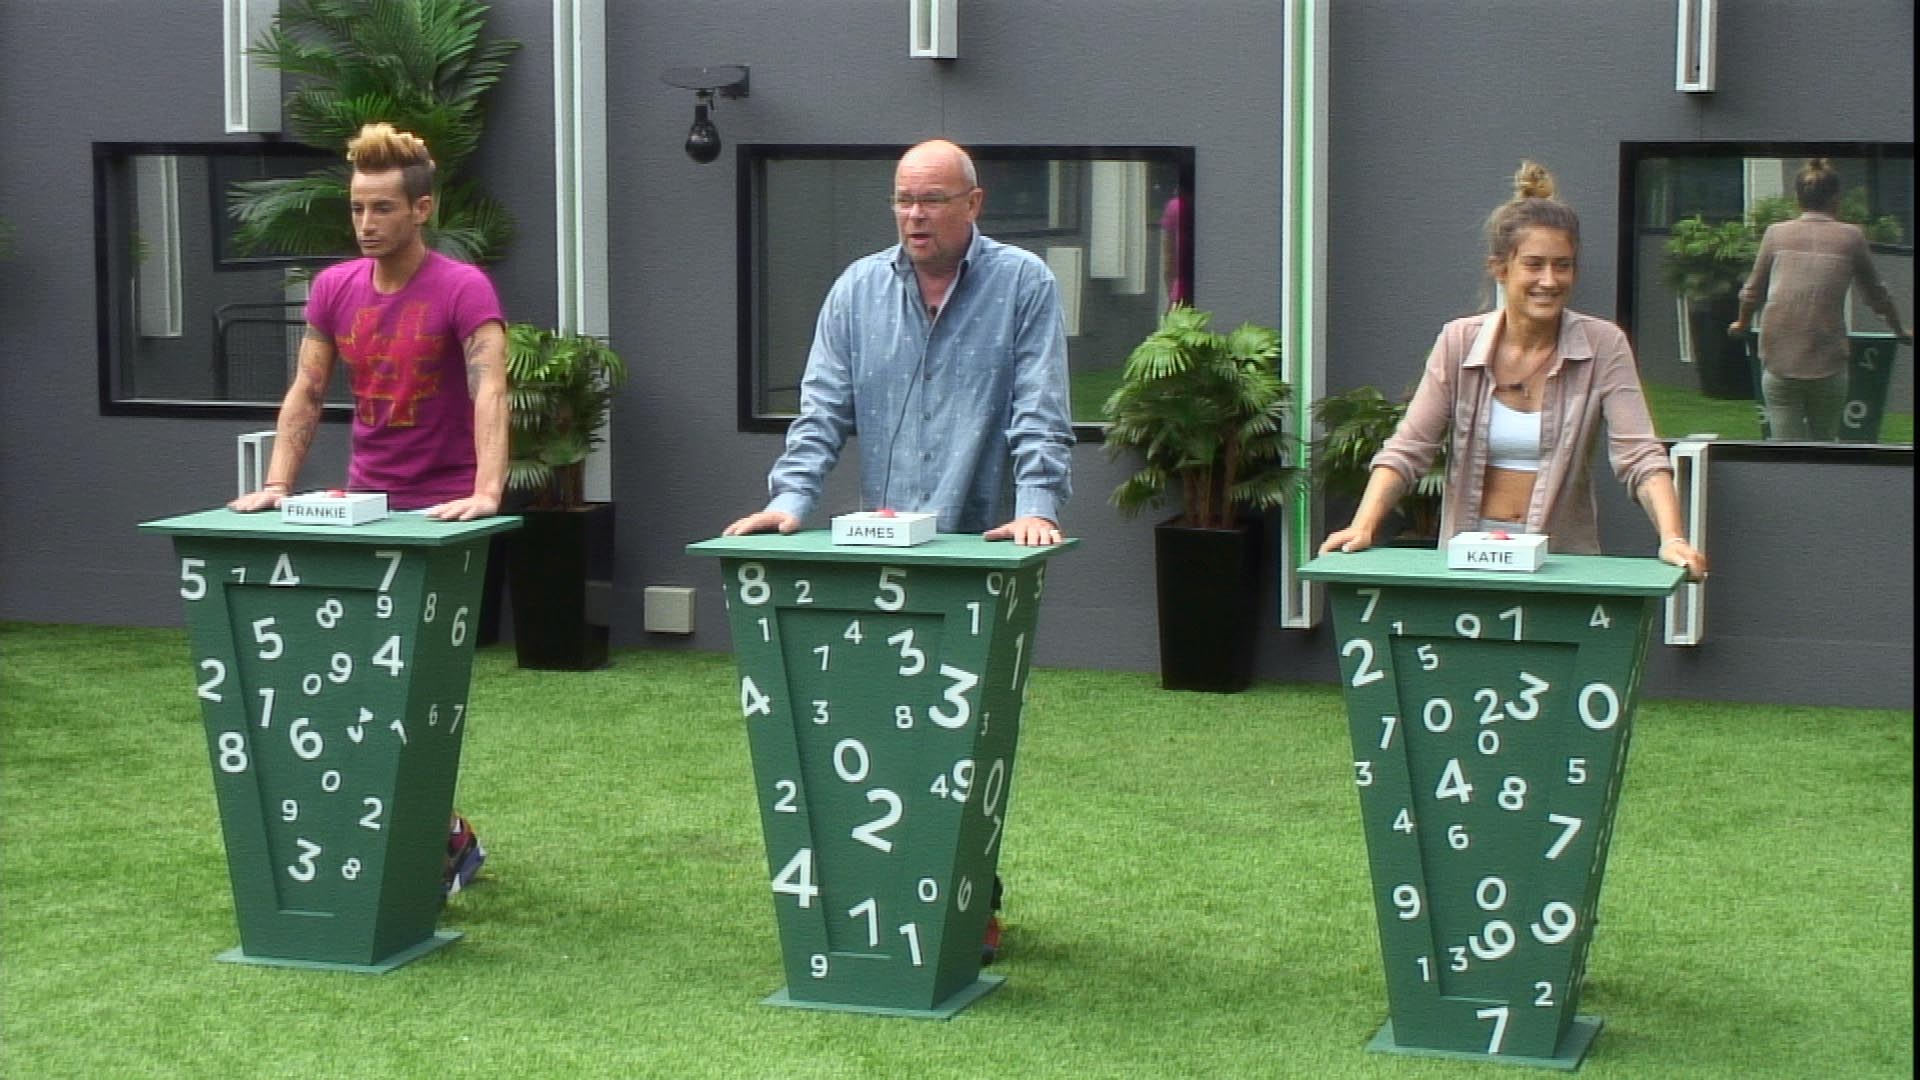 Day 23: Shopping task continues as the Housemates are distracted